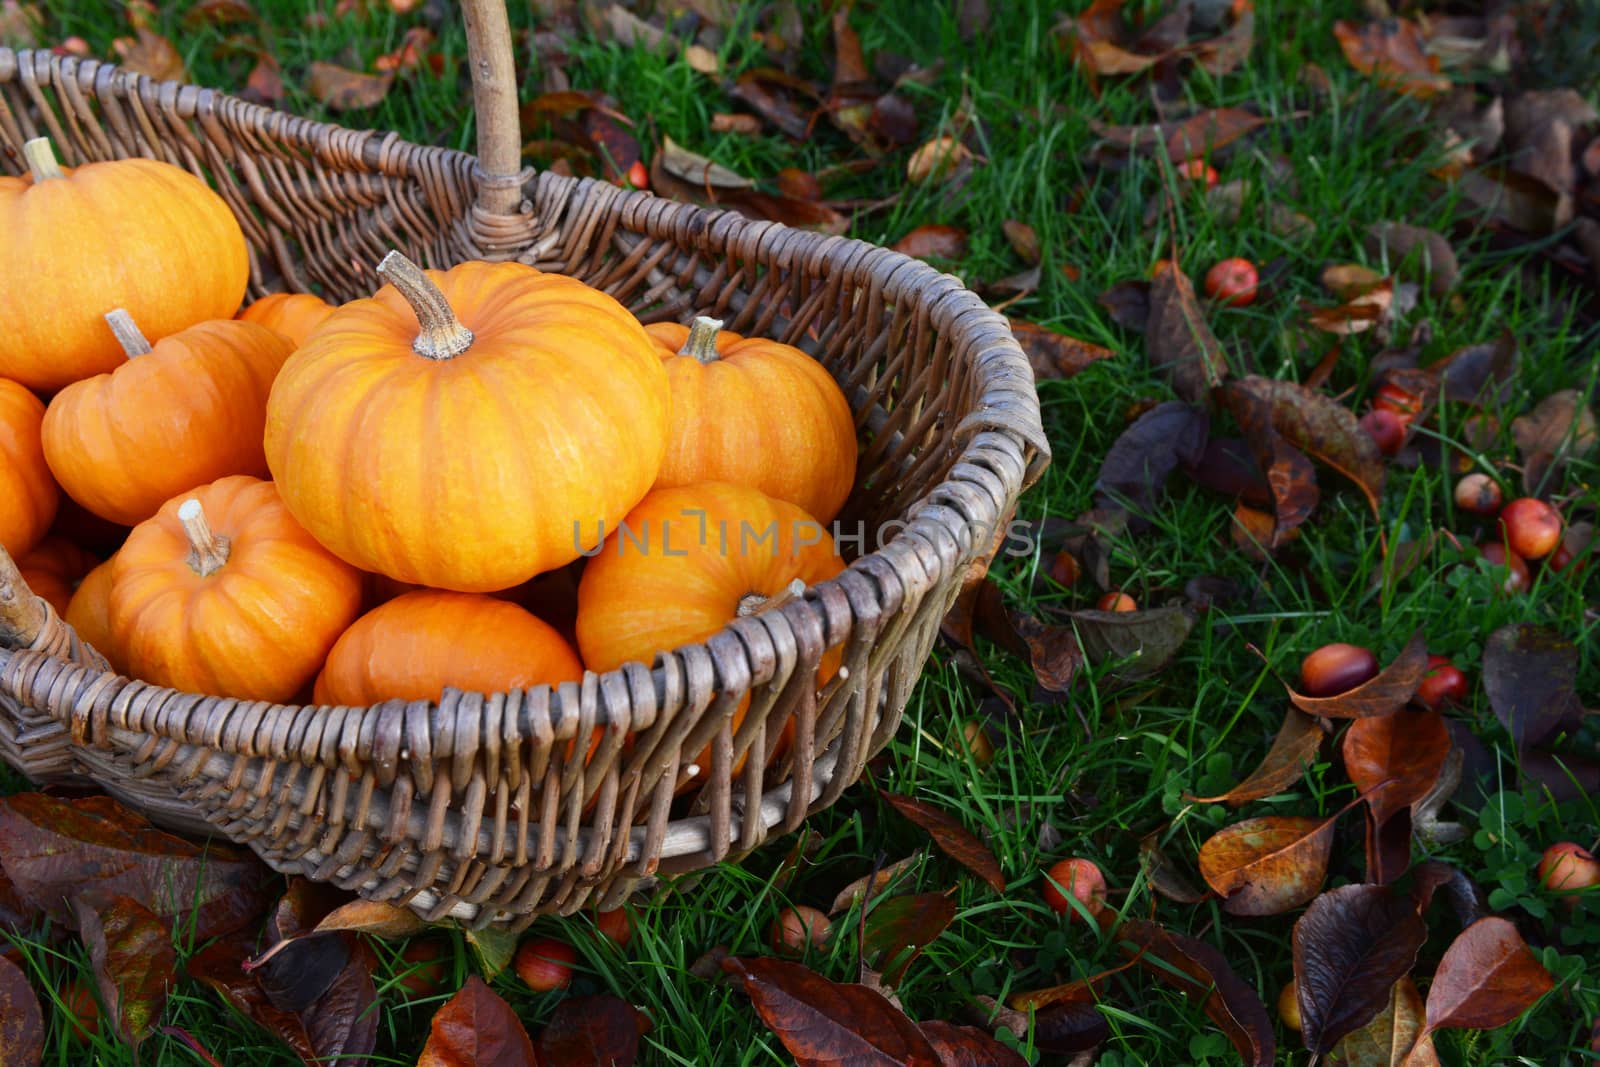 Rustic basket of small orange pumpkins for Thanksgiving by sarahdoow